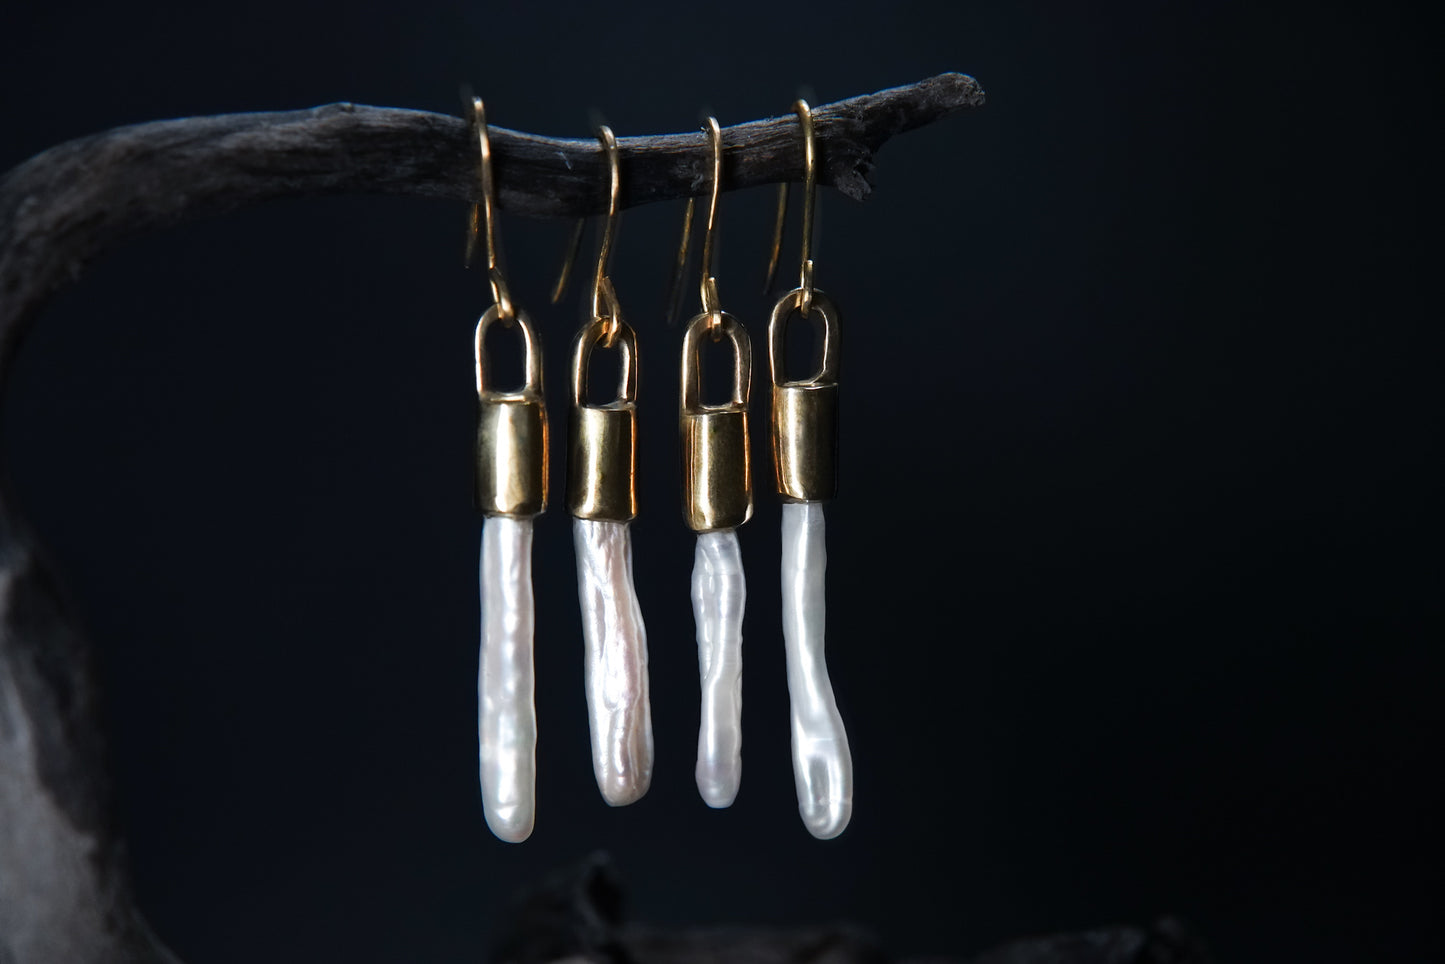 Wands Earings: Double pairs